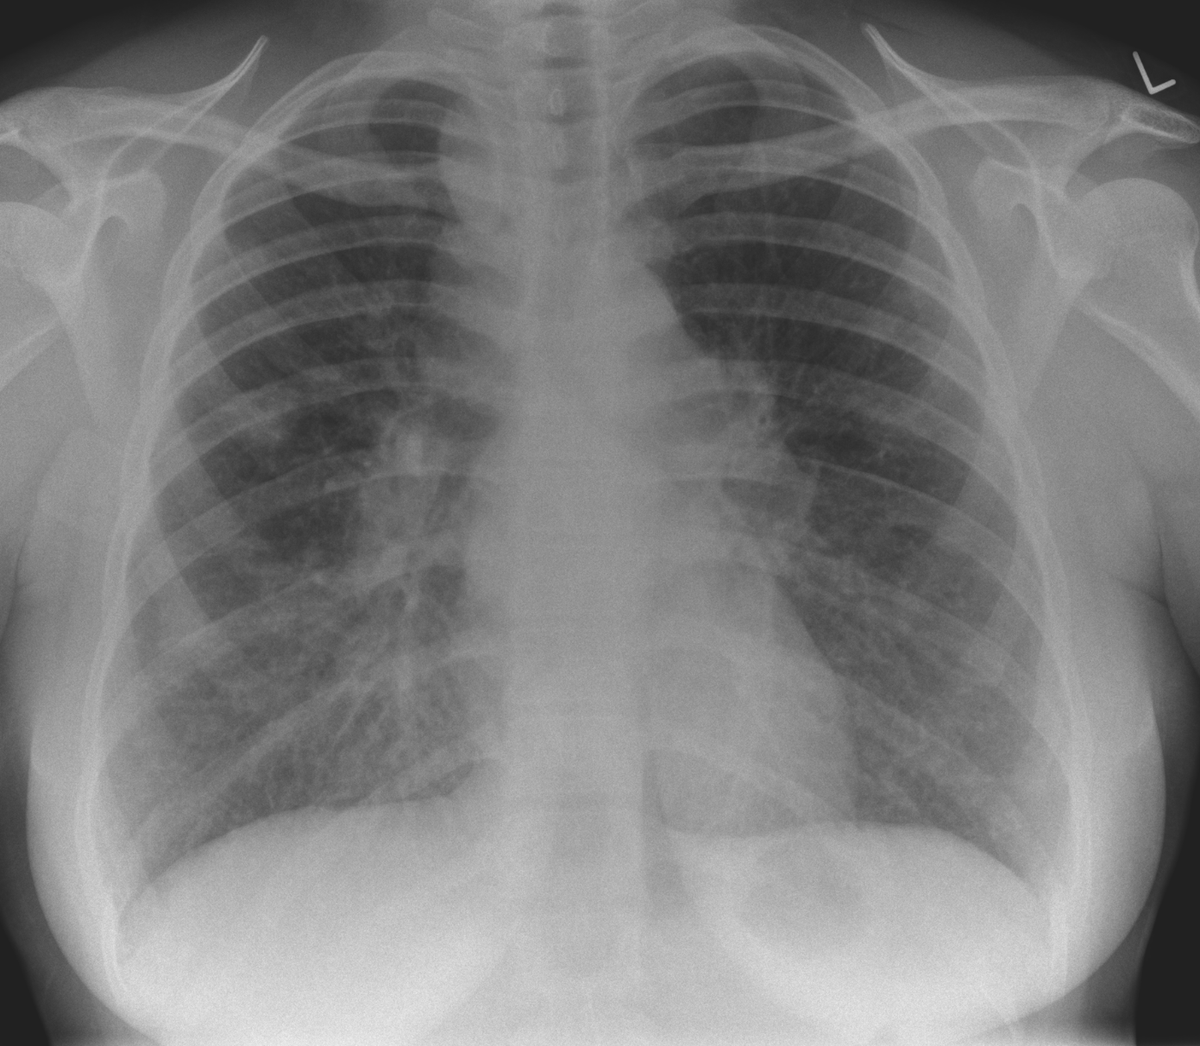 We have posted the answer to this week's radiology image challenge on the ERS Facebook. Head over to see if you got the answer correct: facebook.com/EuropeanRespir… Thanks for taking part! Try more case studies on the ERS Respiratory Channel: channel.ersnet.org/channel-52-rad… #ImageOfTheWeek